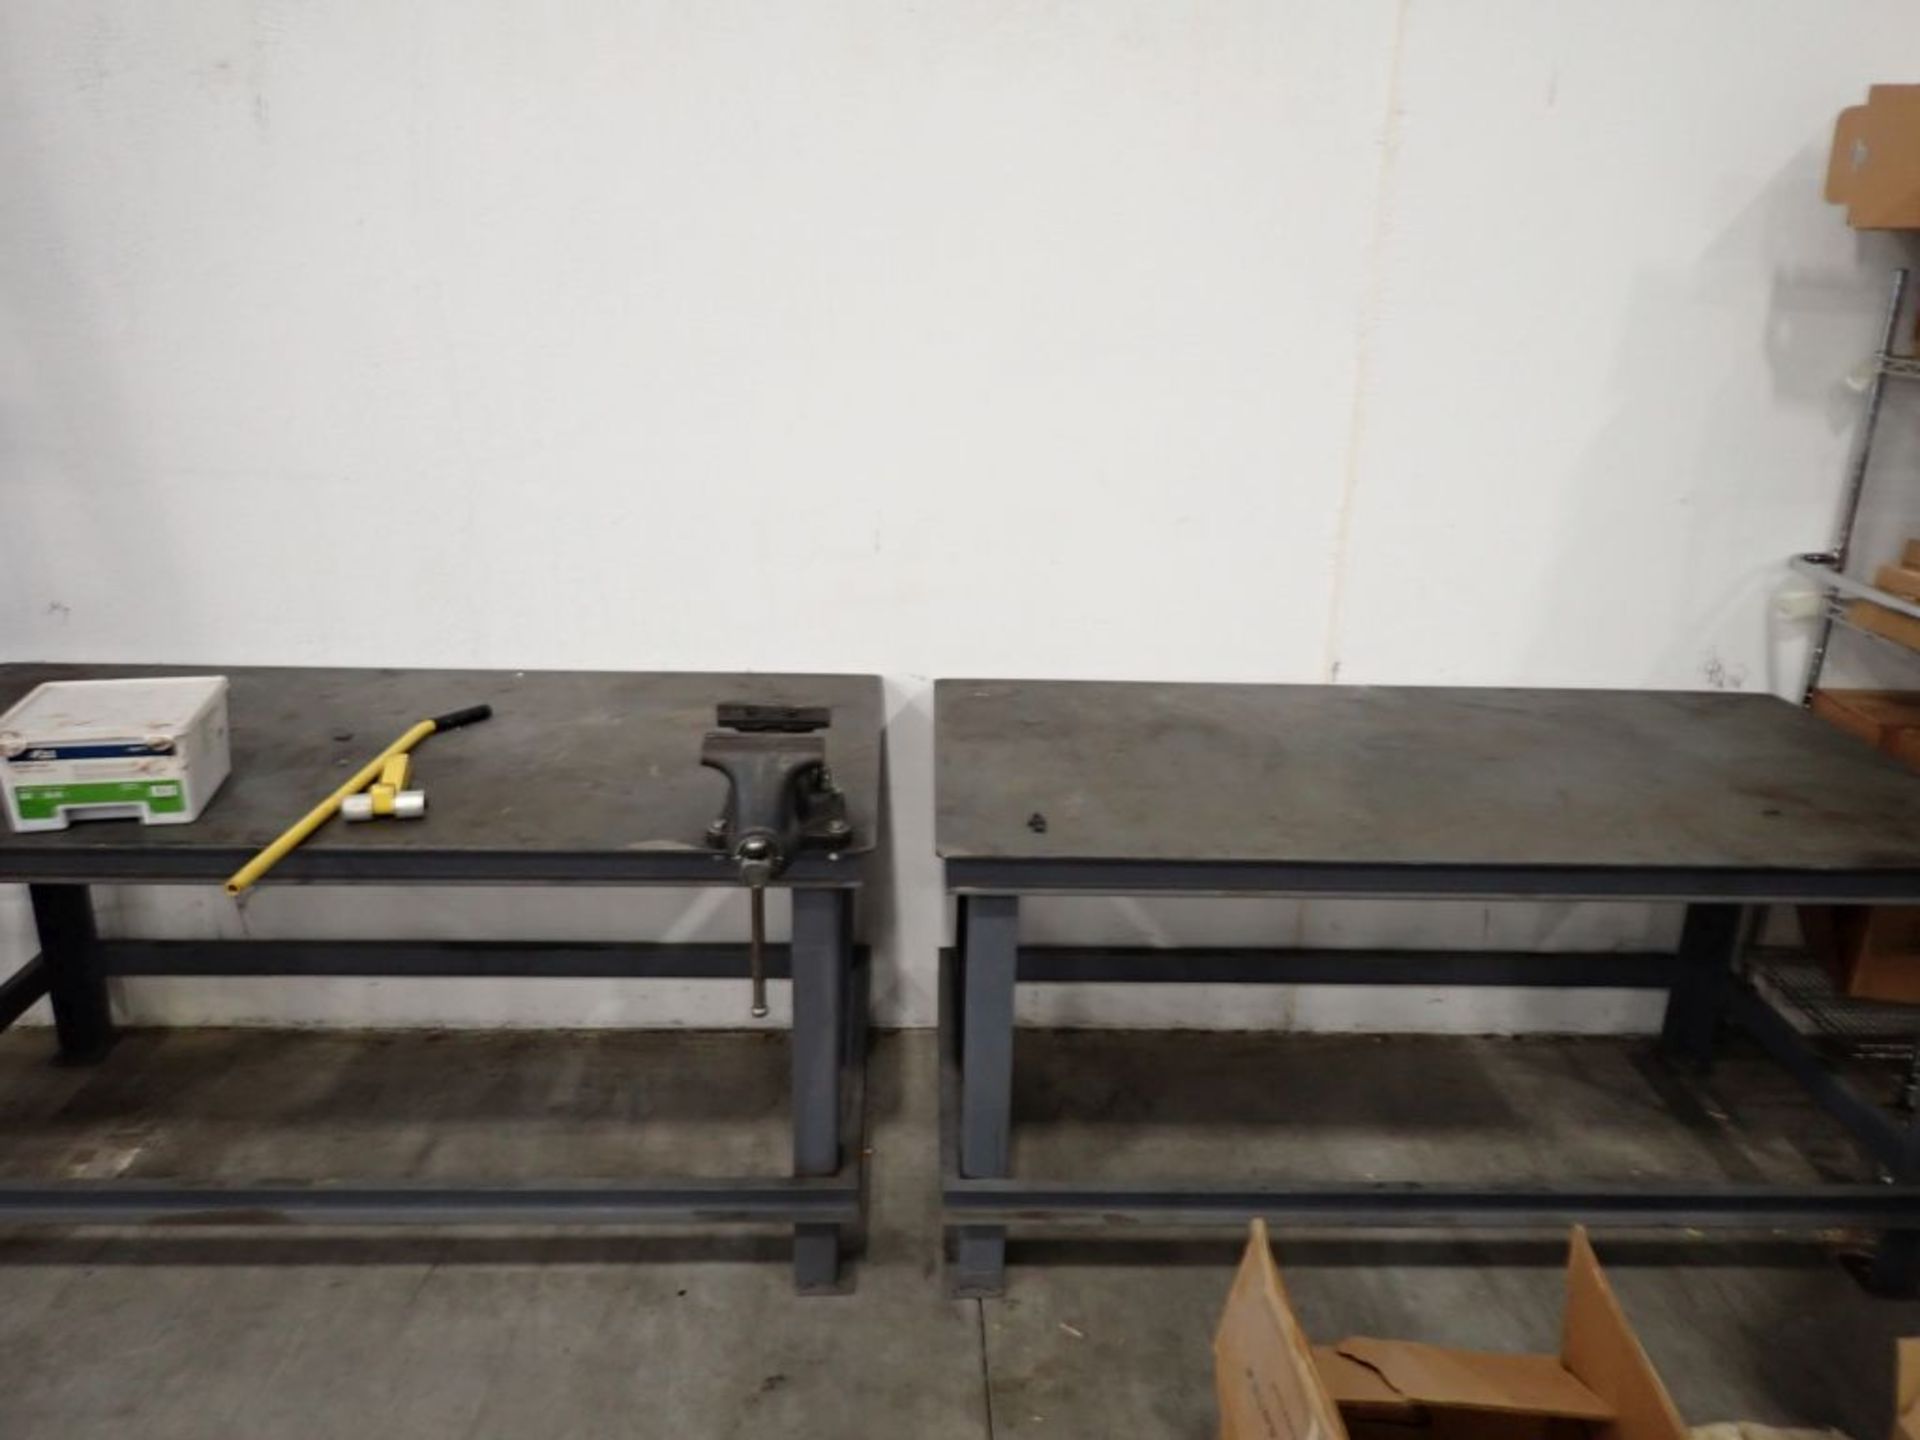 Lot of (2) 36" x 72" Metal Tables with (1) Vise